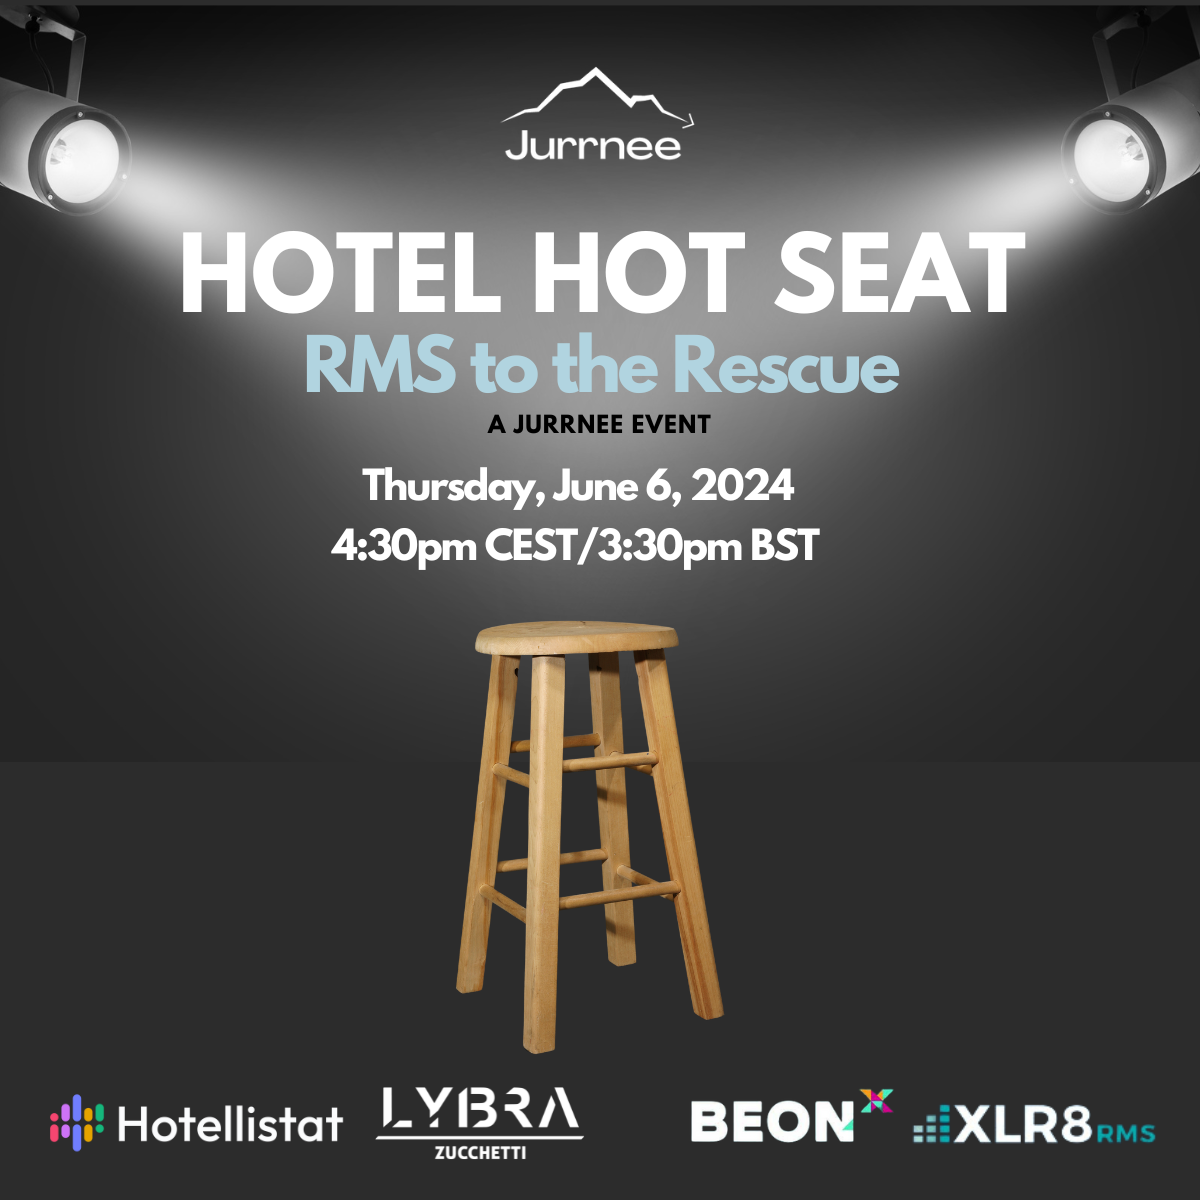 Jurrnee - HOTEL HOT SEAT RMS to the Rescue Square LI Post DAY 2 - June 6 (LinkedIn Post)